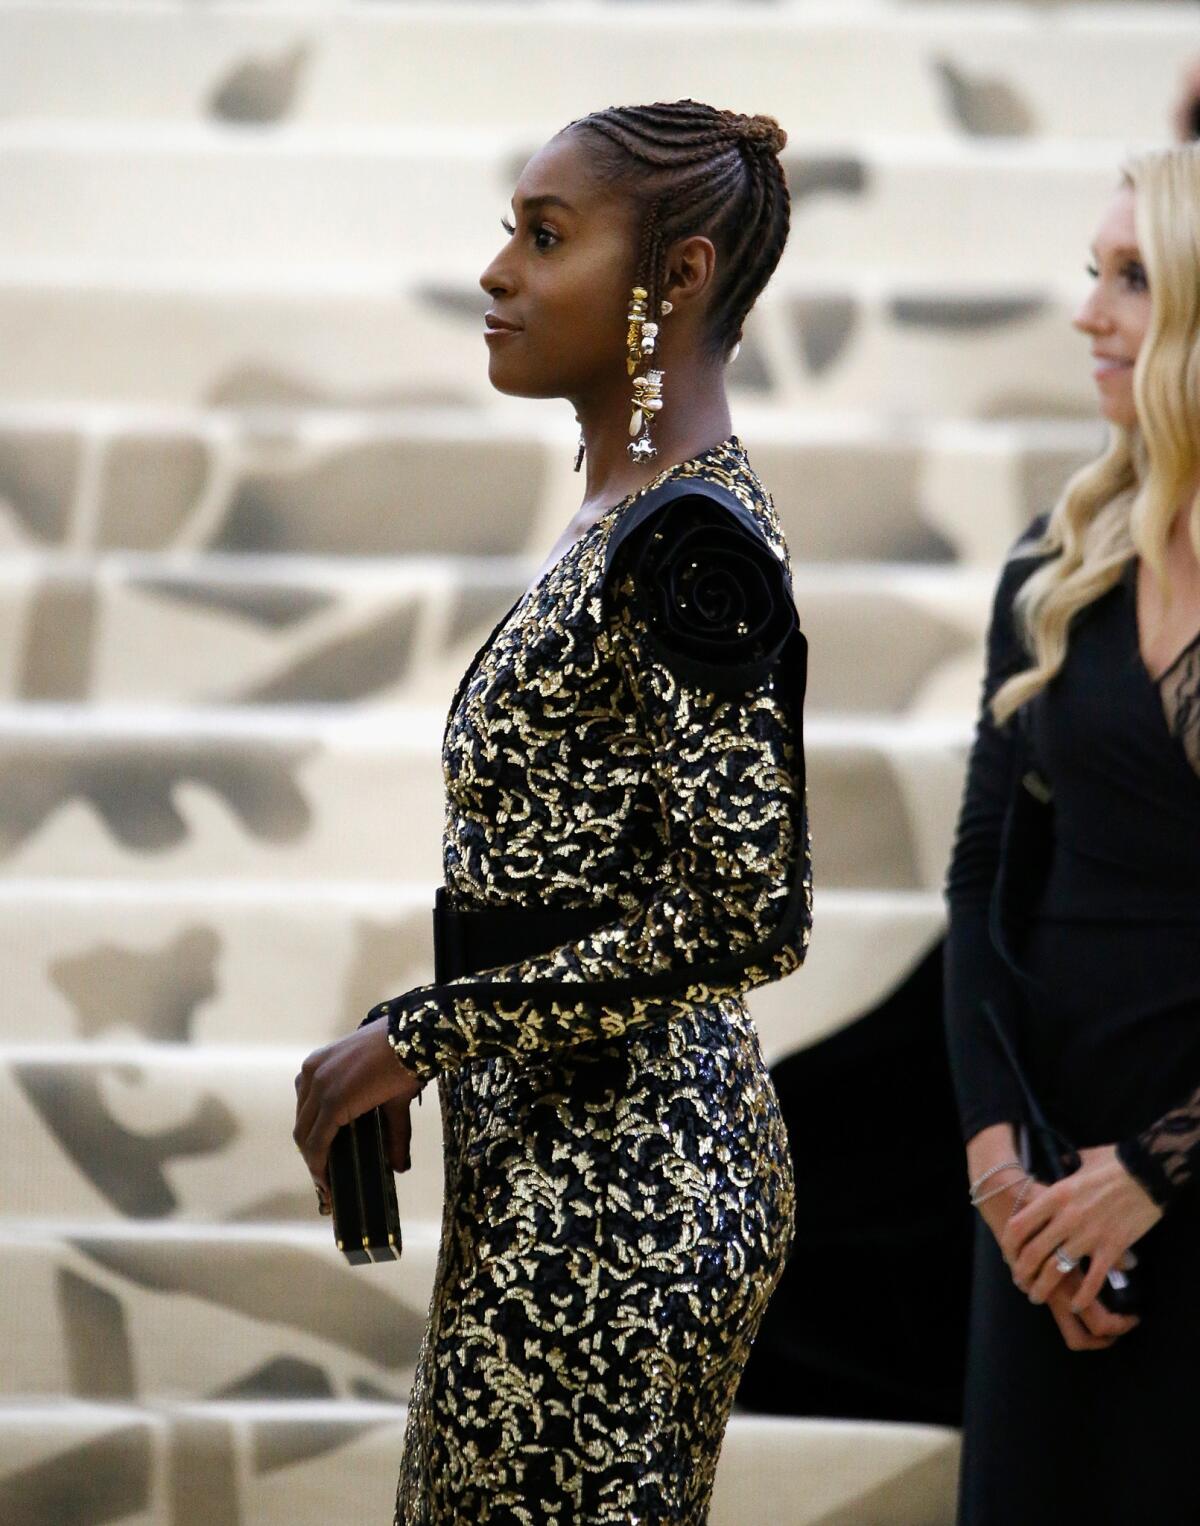 Issa Rae at the "Heavenly Bodies: Fashion and the Catholic Imagination" Costume Institute Gala at the Metropolitan Museum of Art in New York on May 7, 2018.